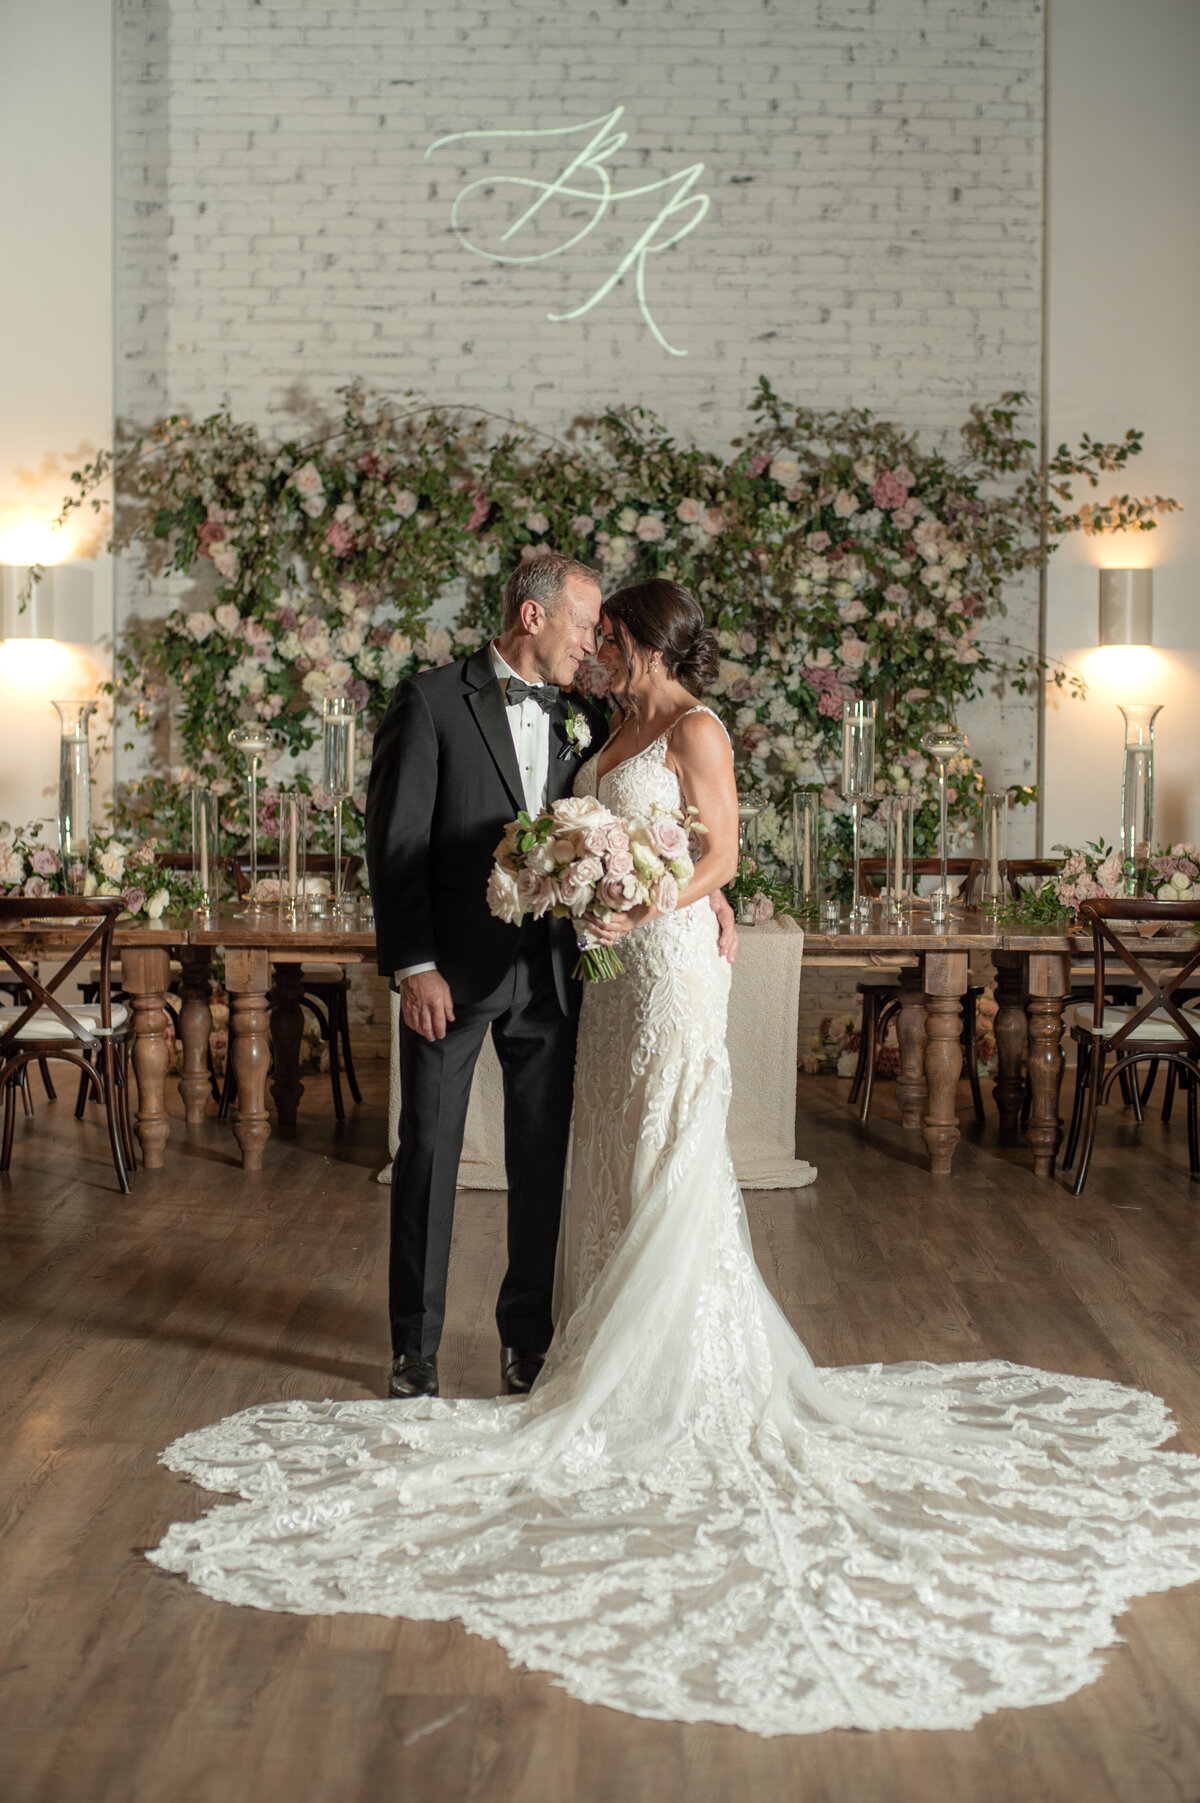 Rob + Bethany Wedding 2022 - The Siners Photography-552